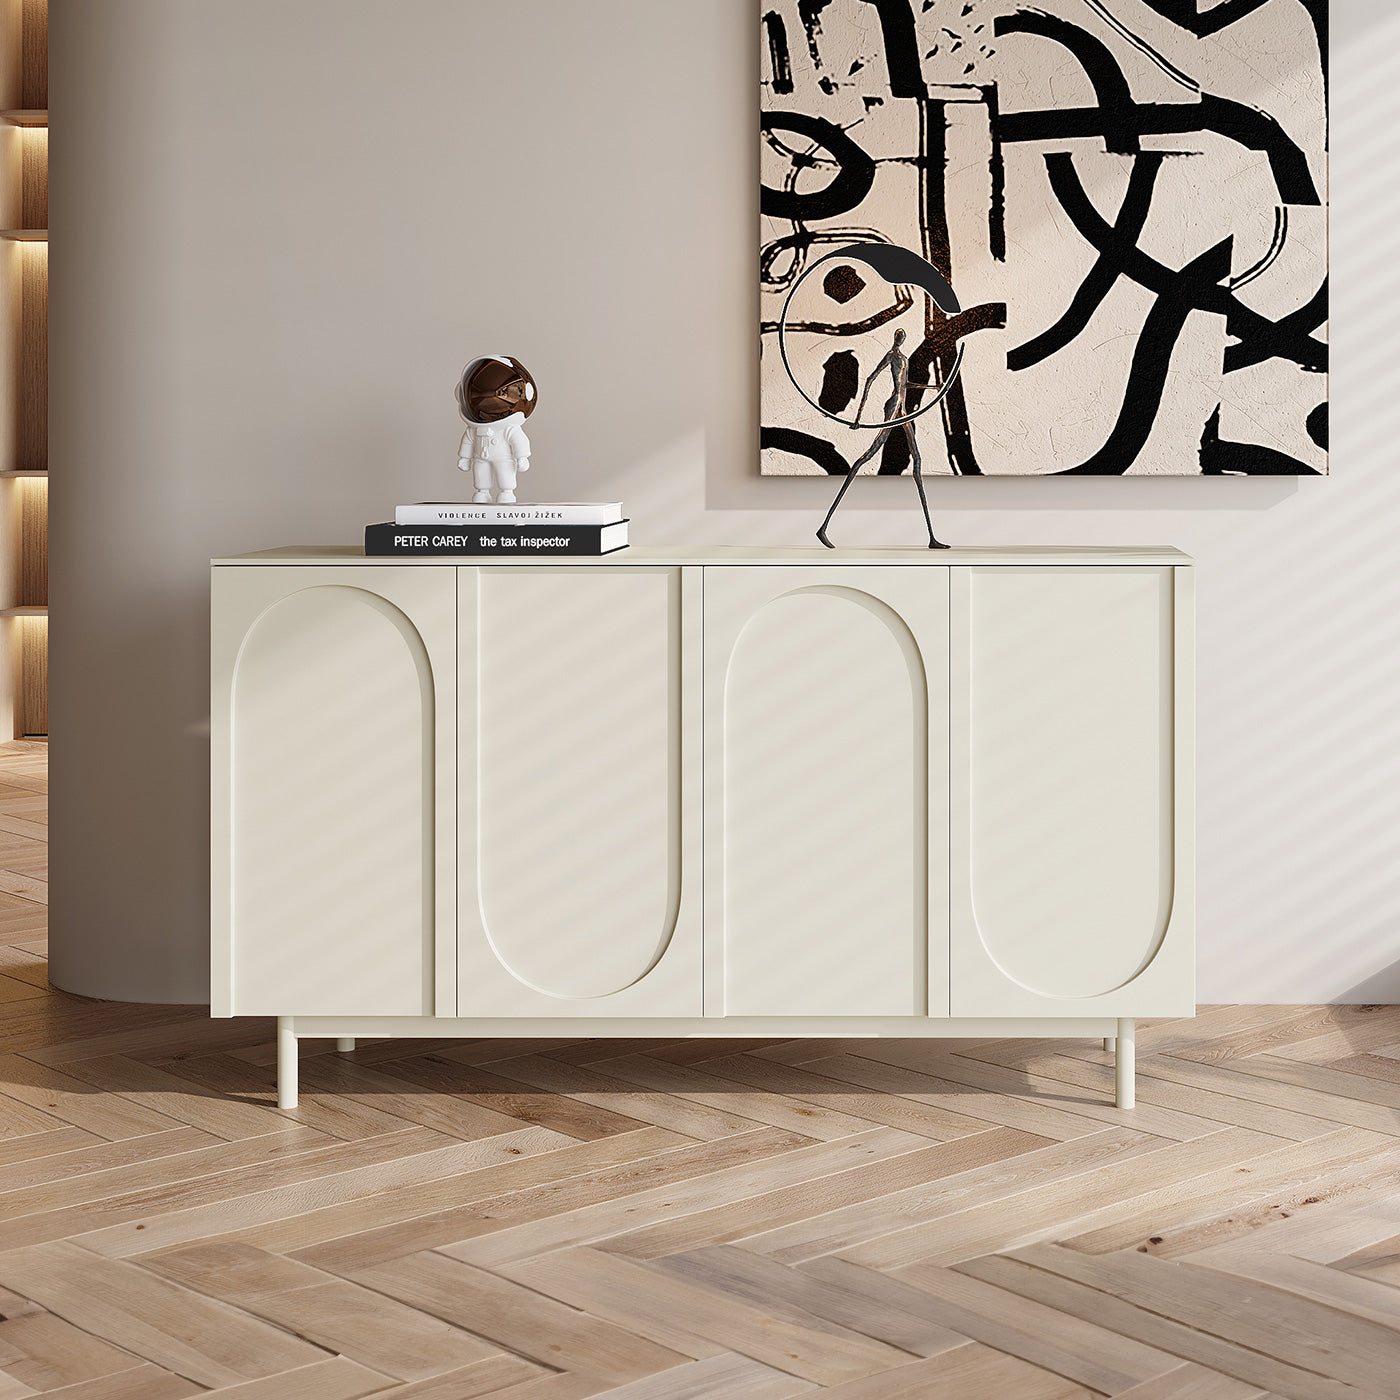 White Long Sideboard Cabinet